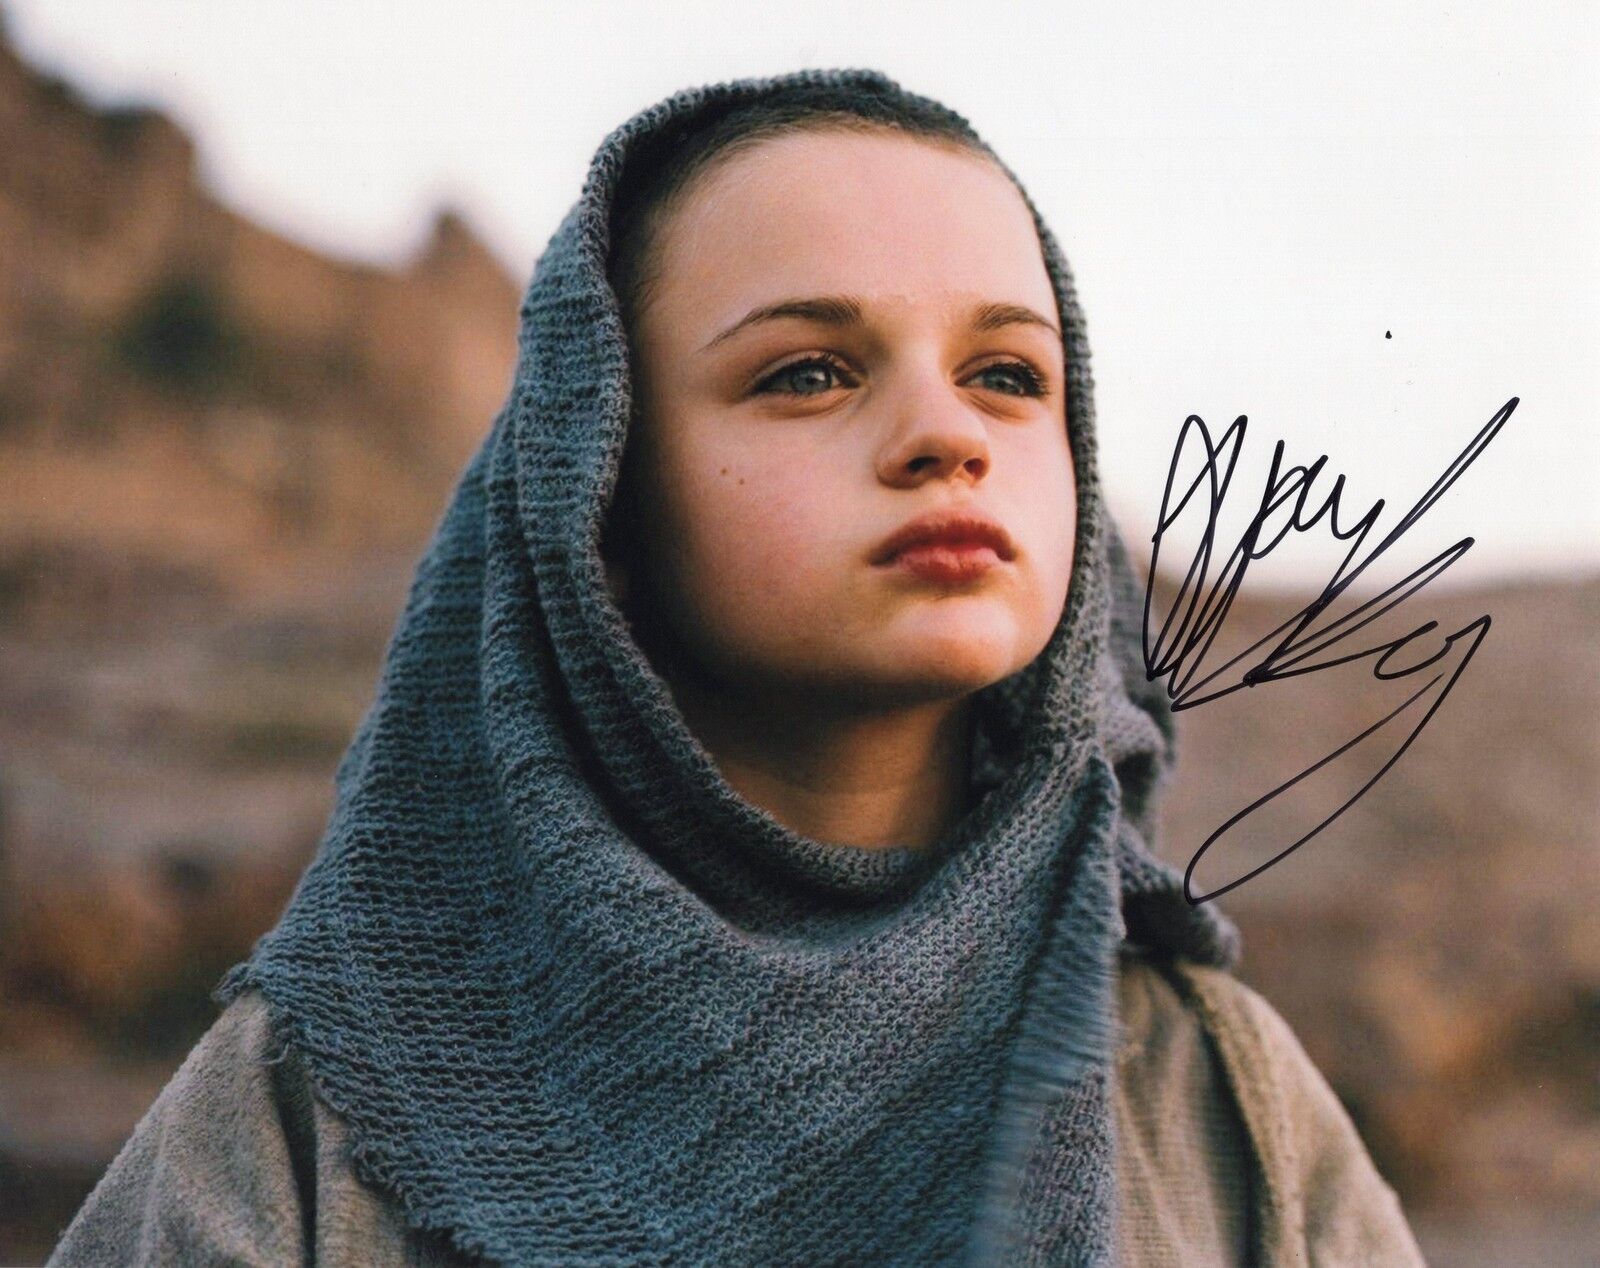 Joey King The Dark Knight Rises Signed 8x10 Photo Poster painting w/COA